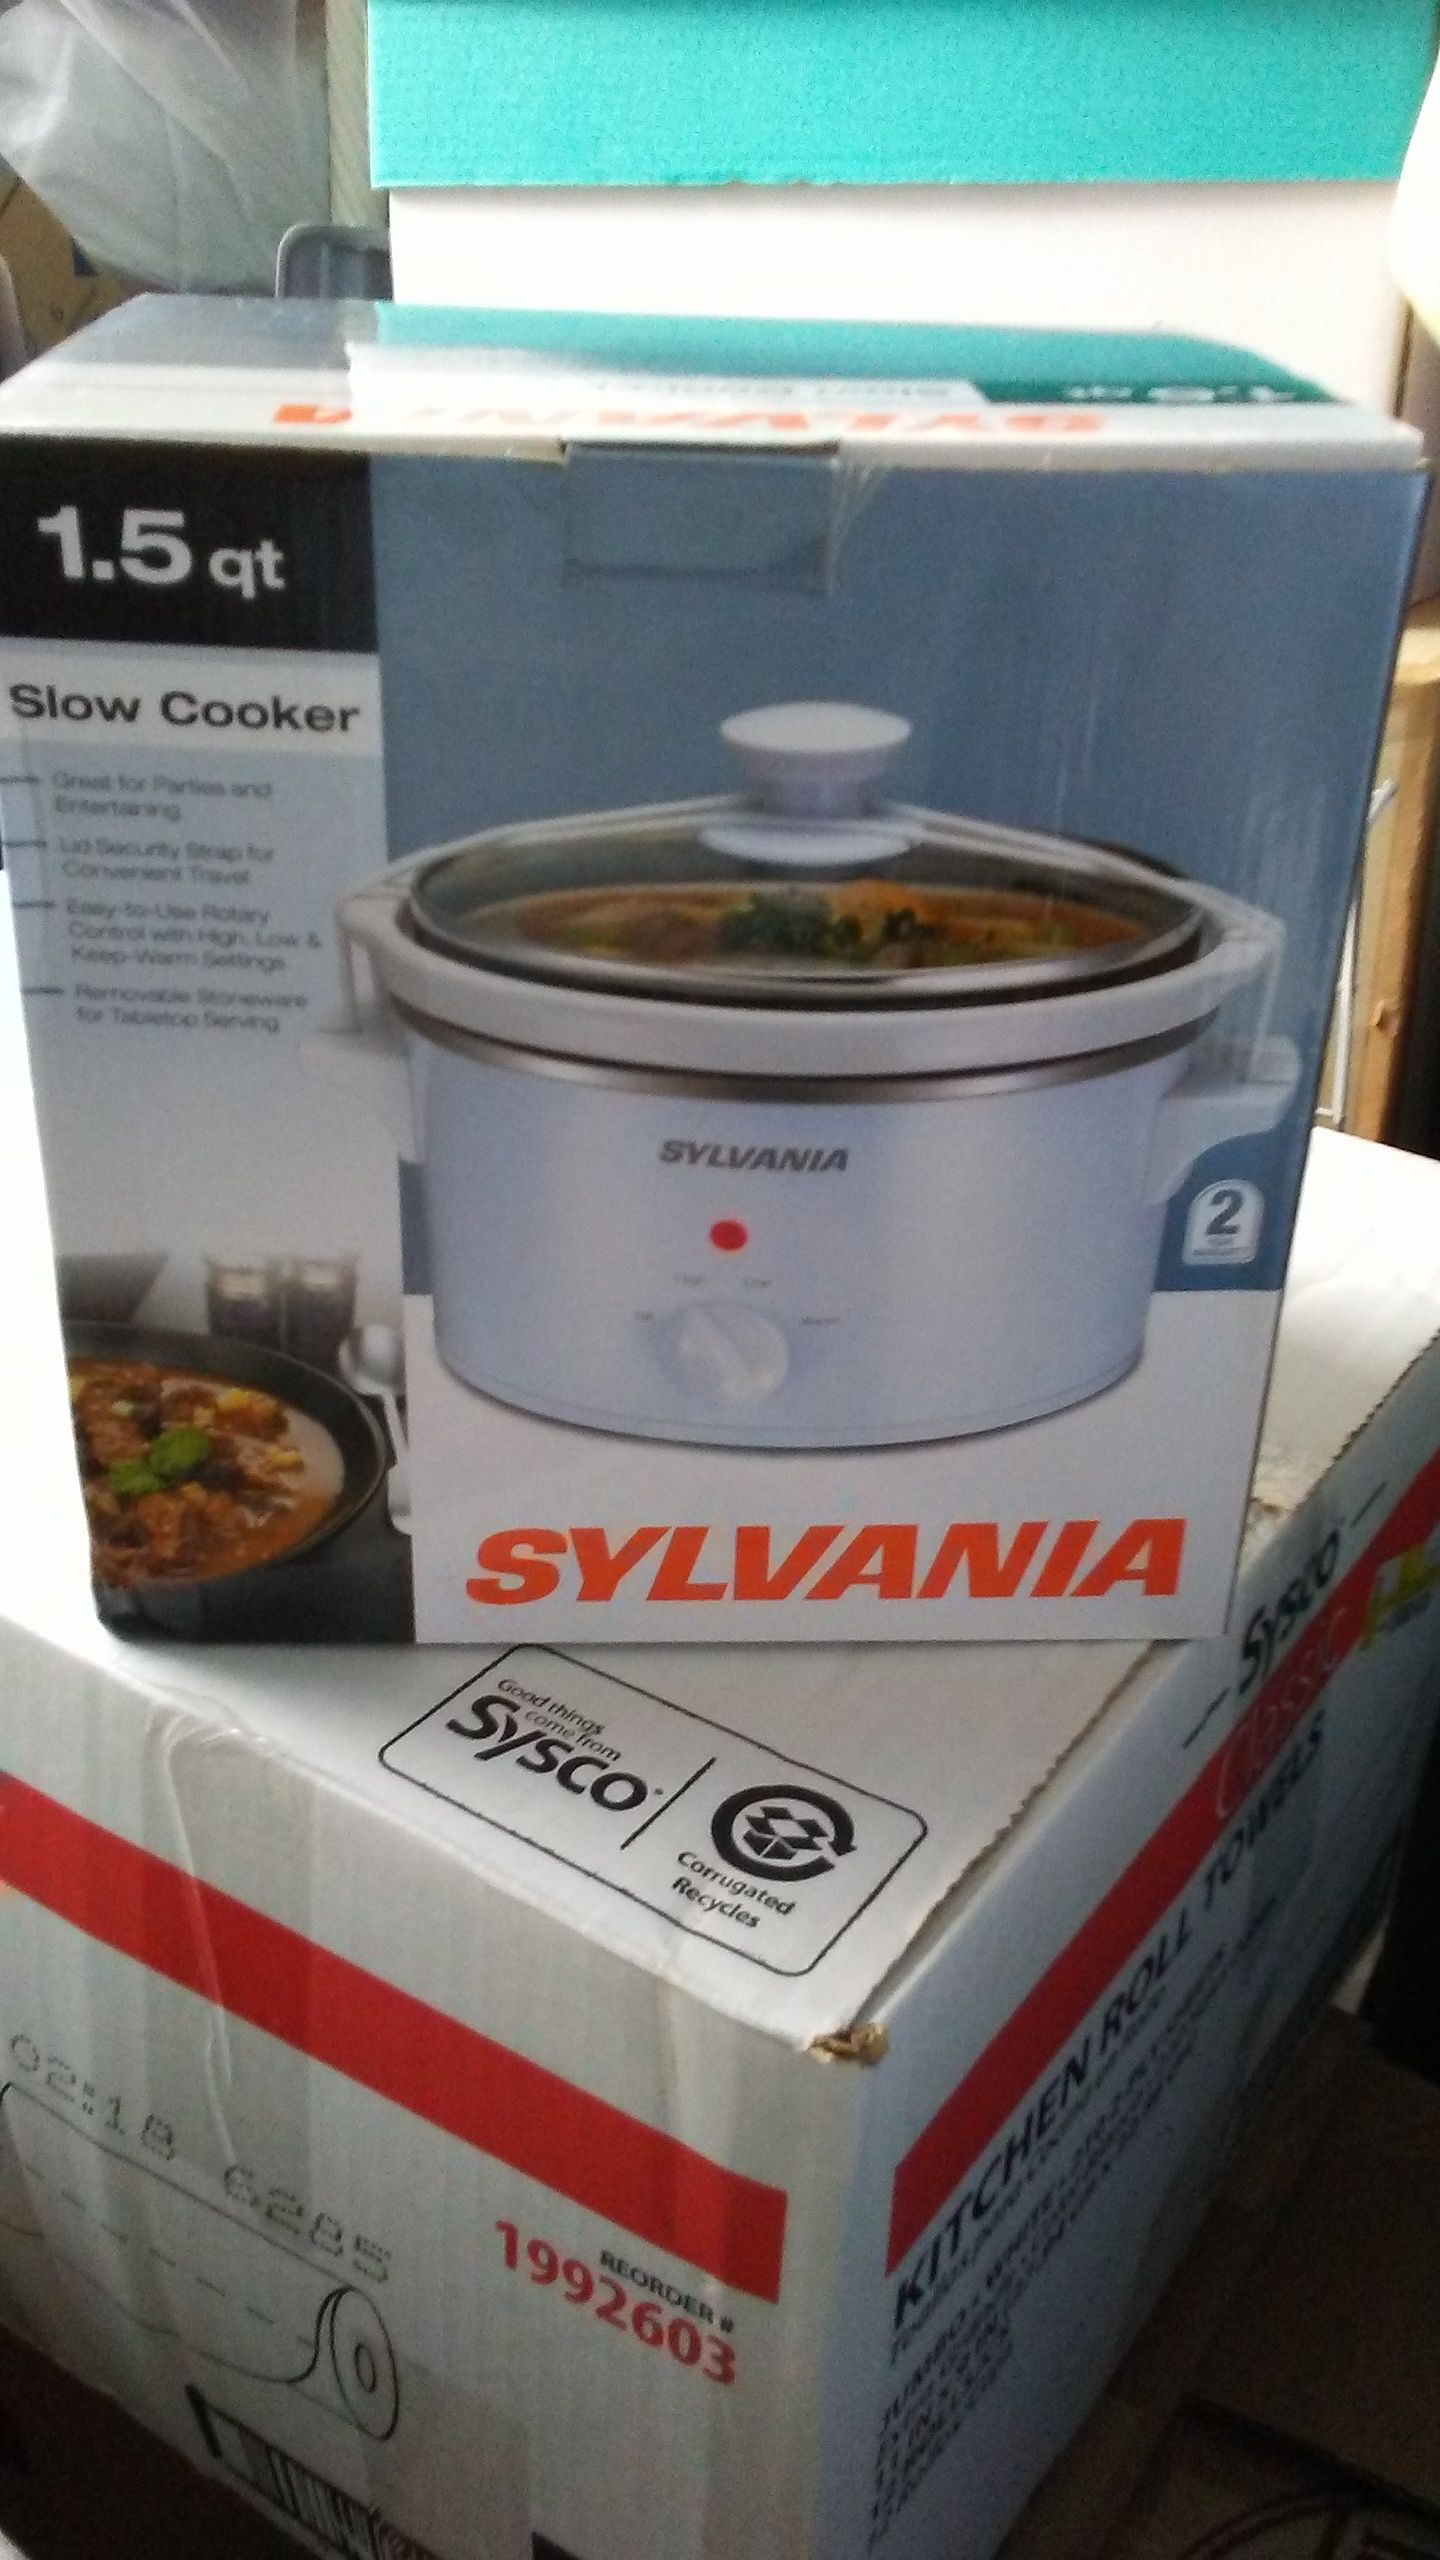 Slow Cooker small. Never used.